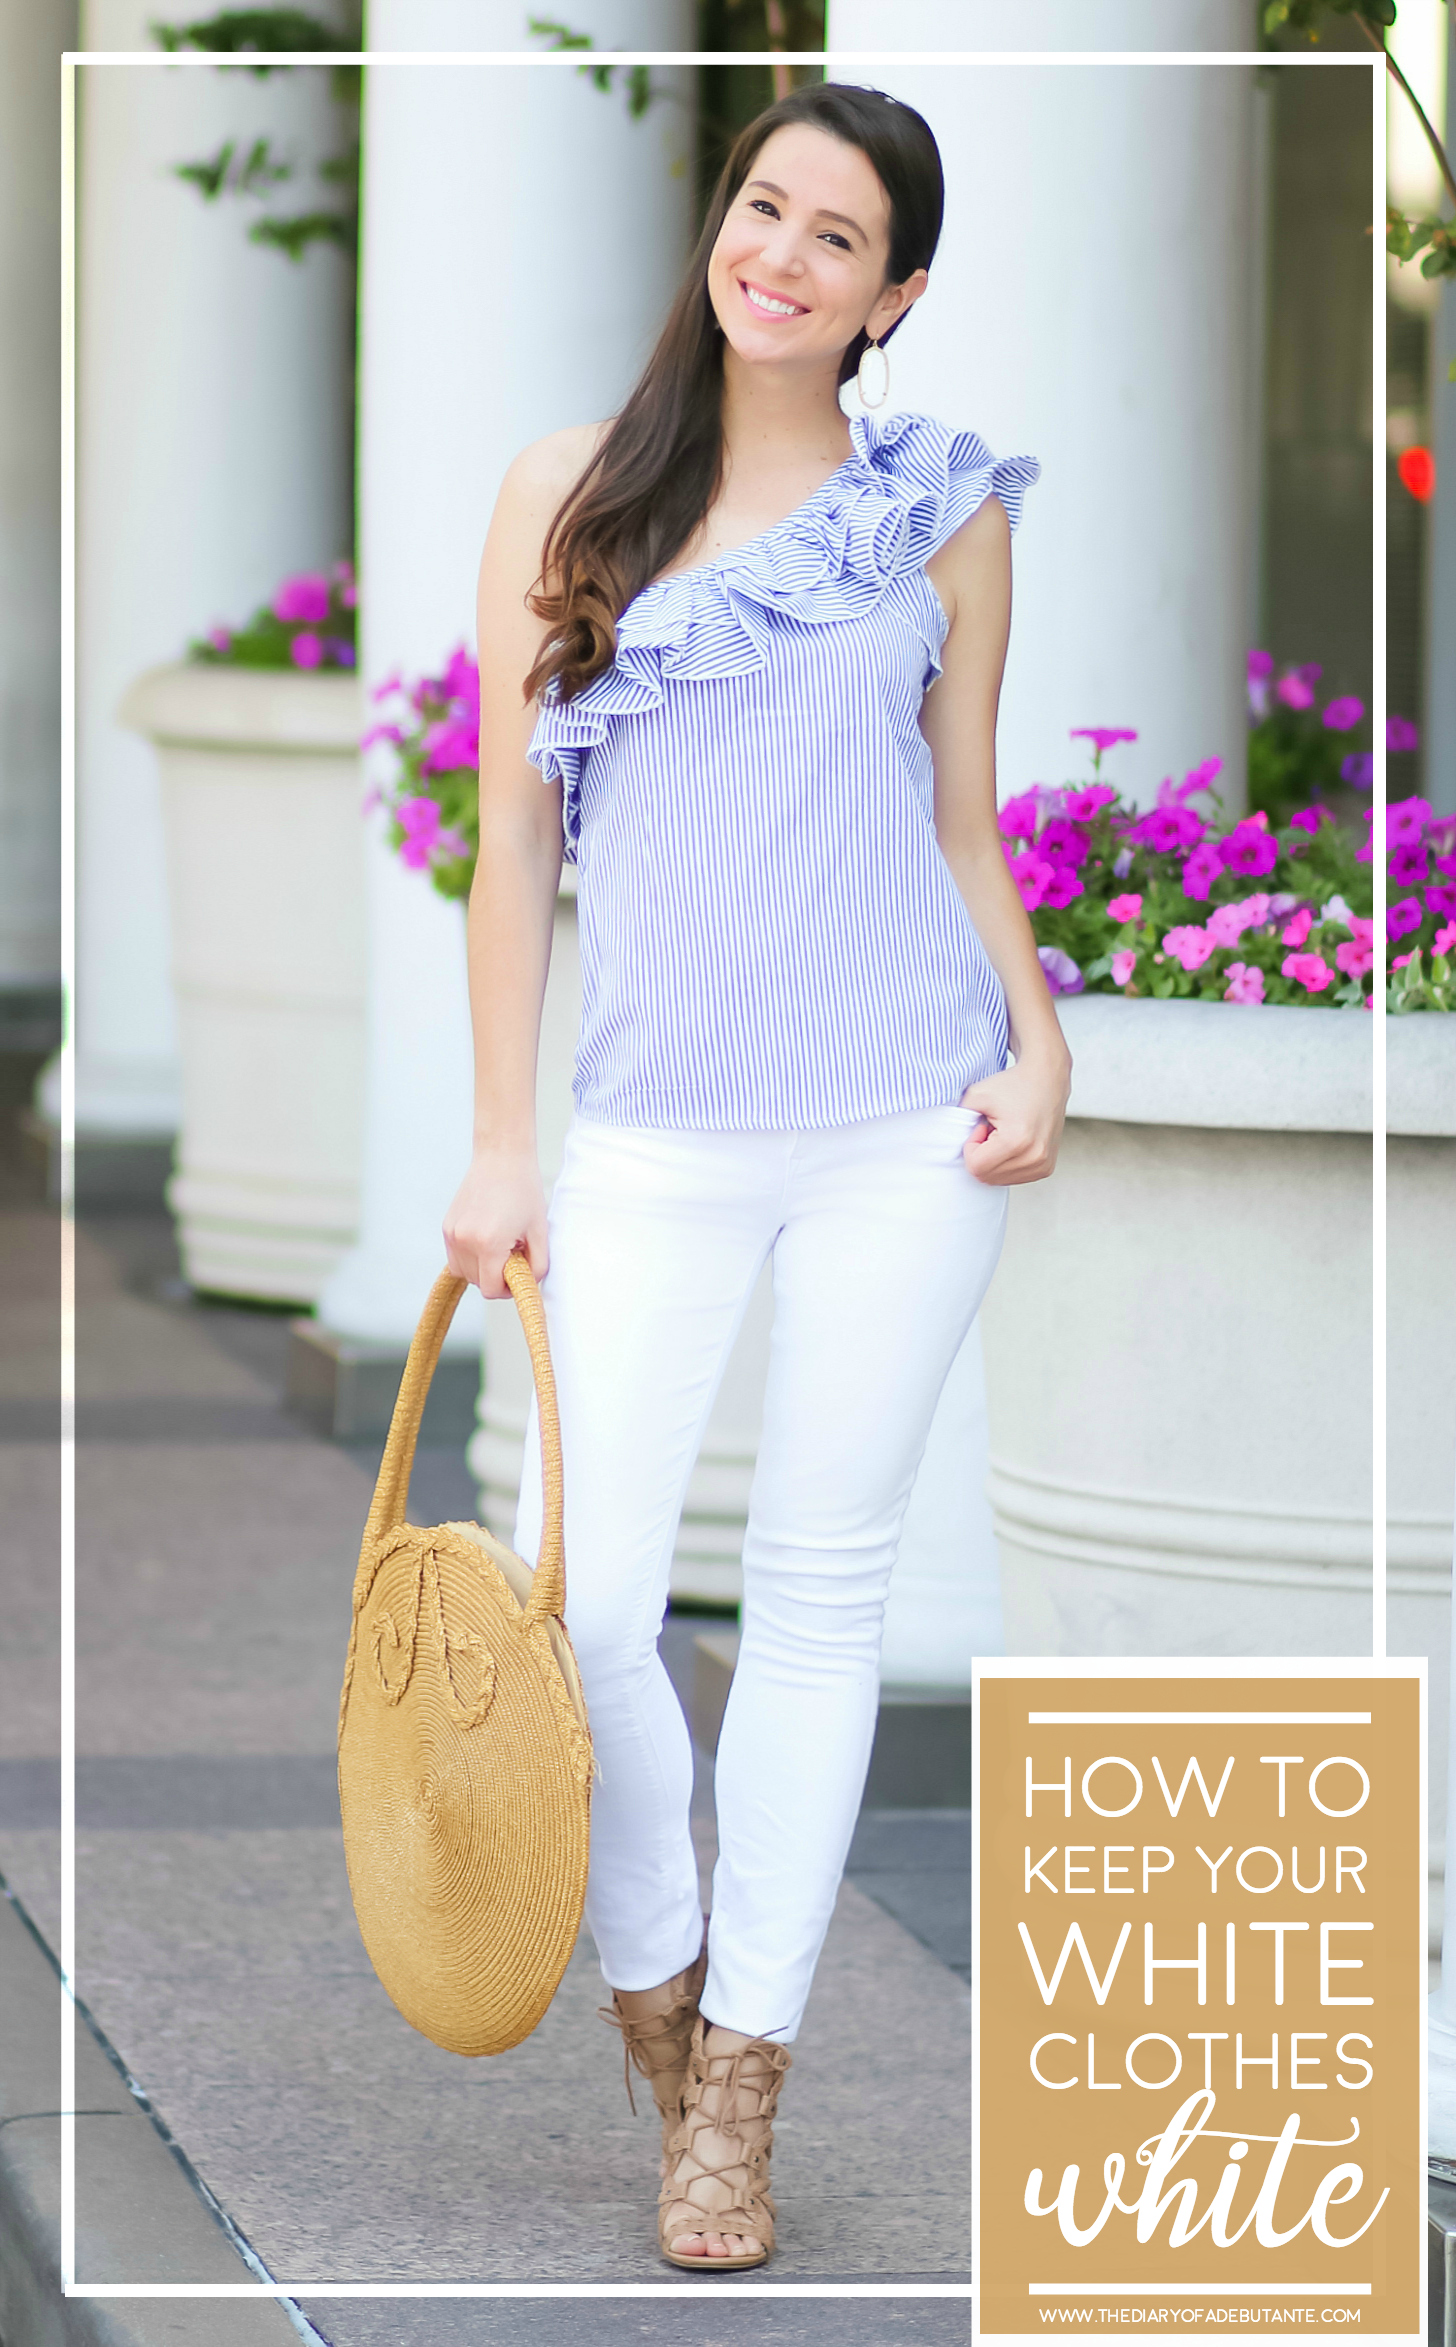 How to keep white clothes white for longer with CLOROX | Casual summer outfit (Shein one-shoulder stripped ruffle top and white jeans) by fashion blogger Stephanie Ziajka from Diary of a Debutante